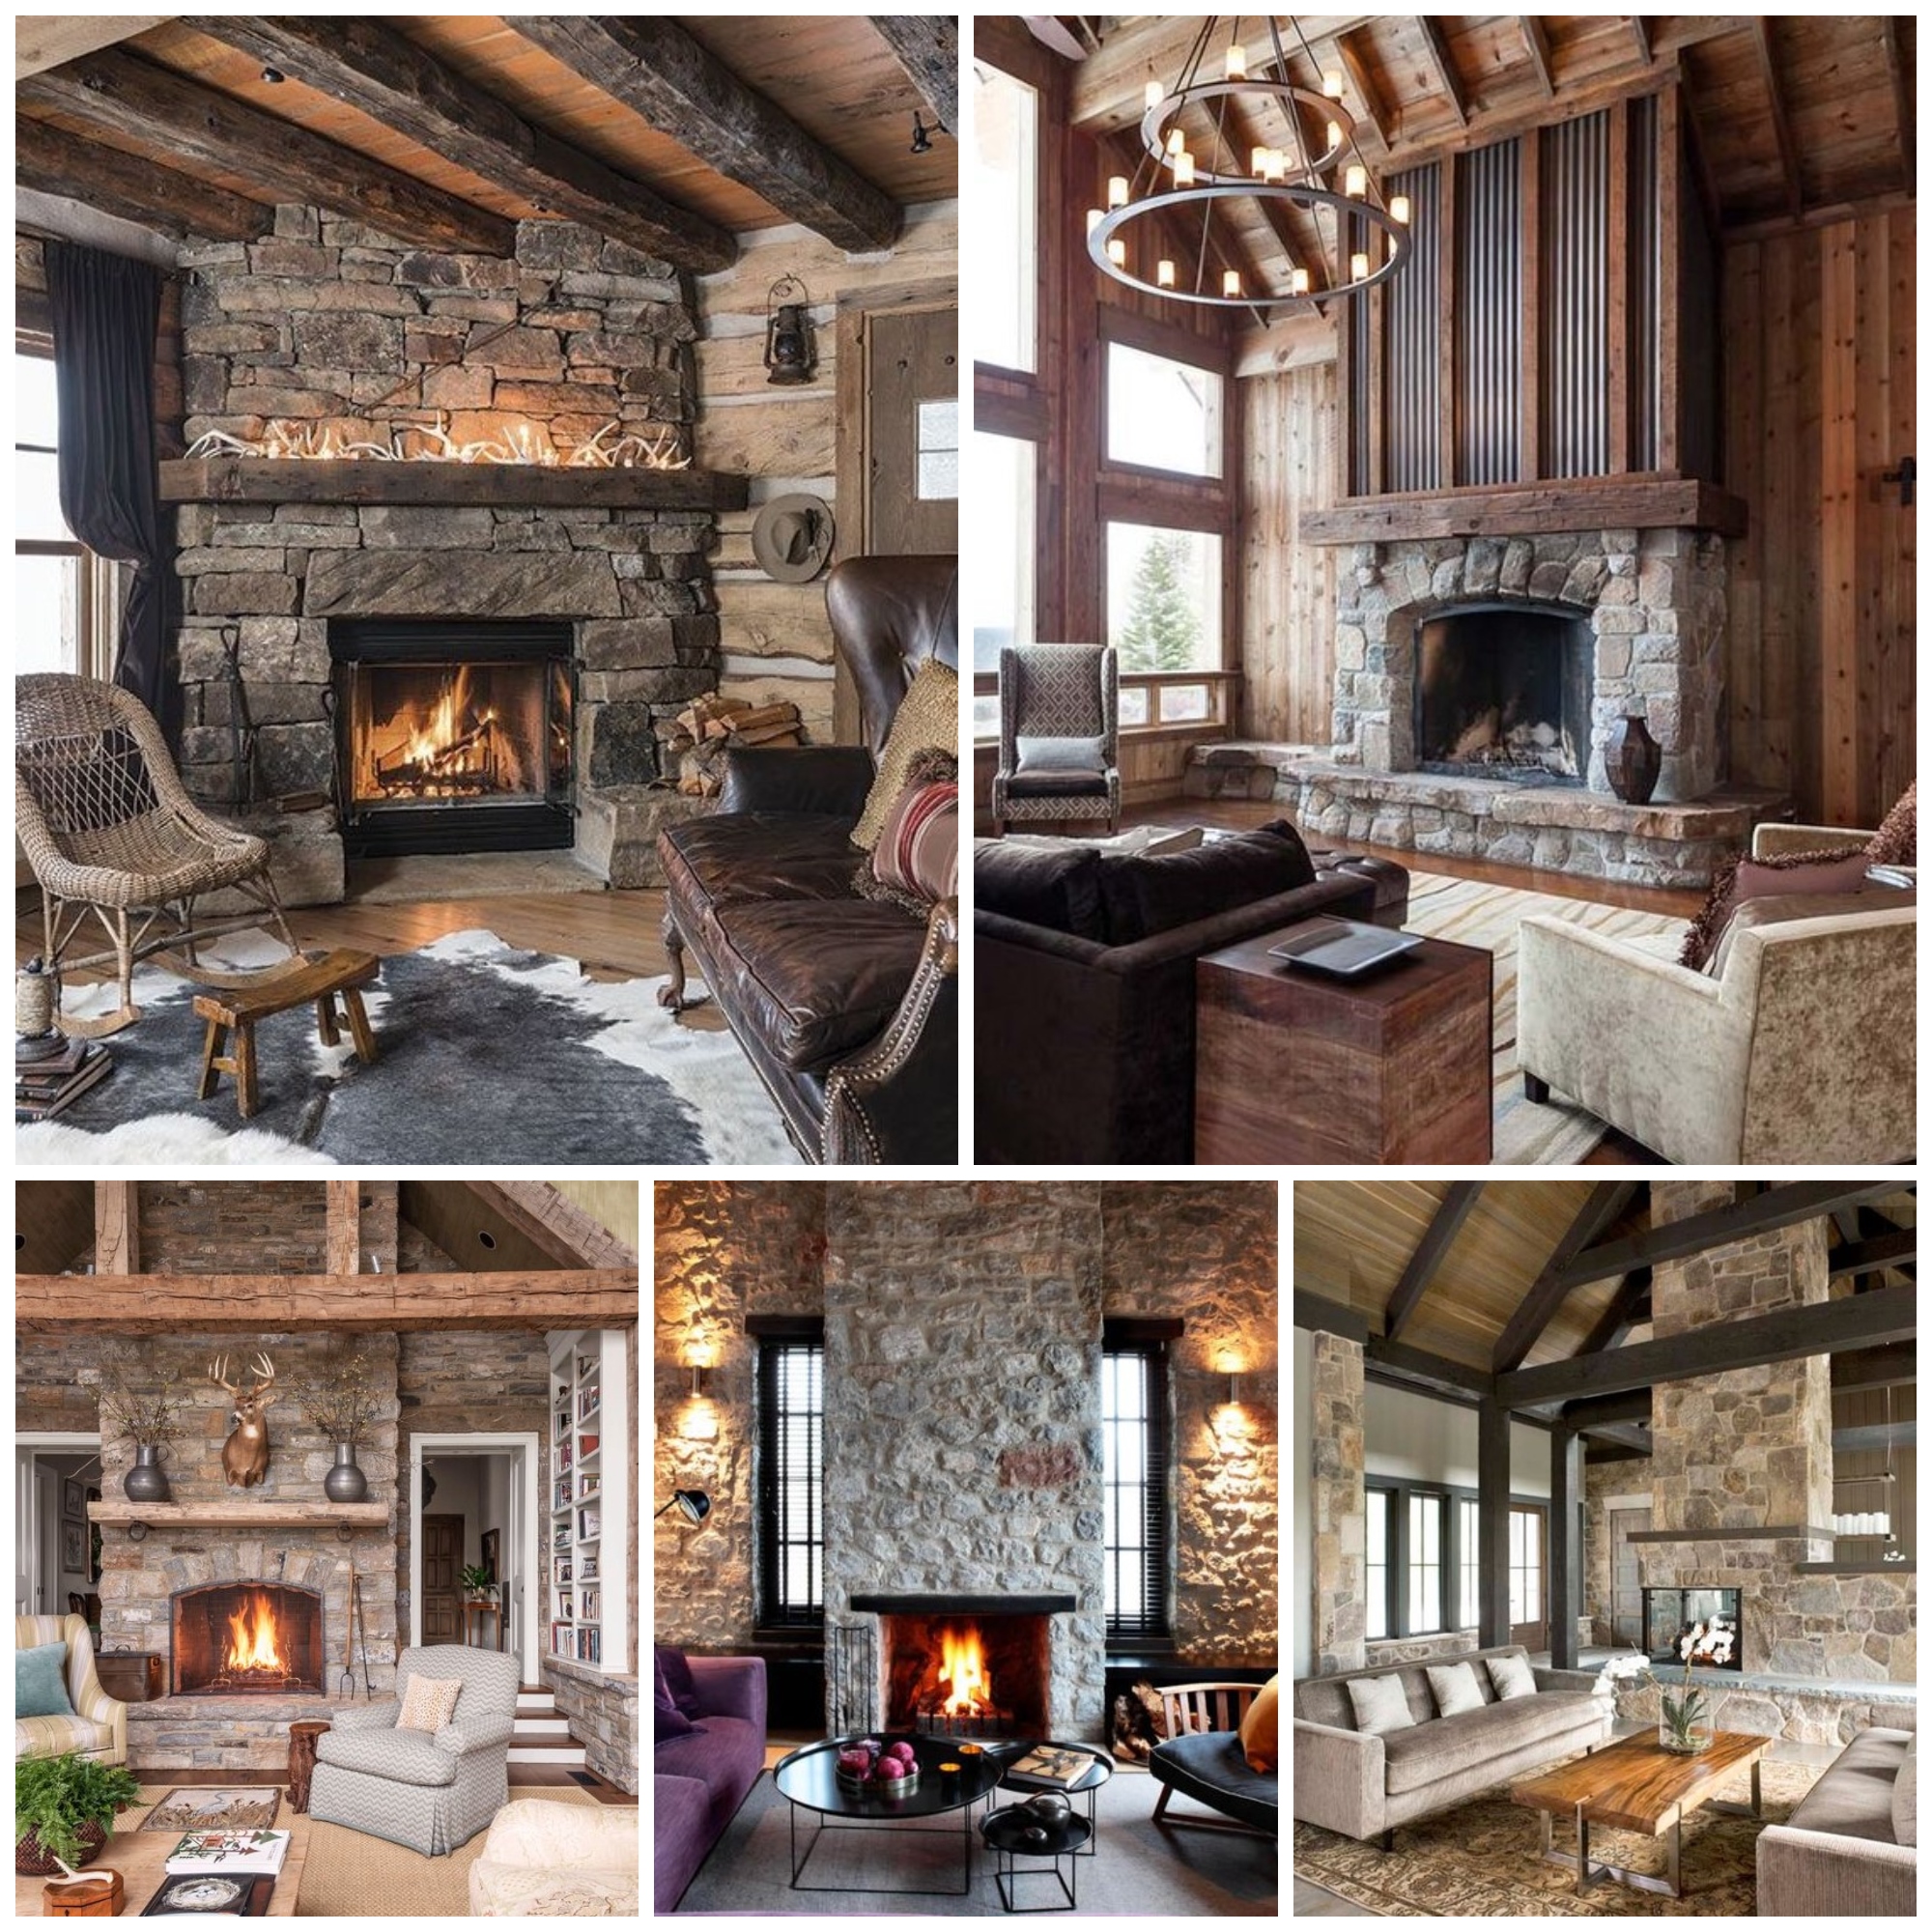 Stylish Stone Fireplace Ideas to Warm Up Your Home